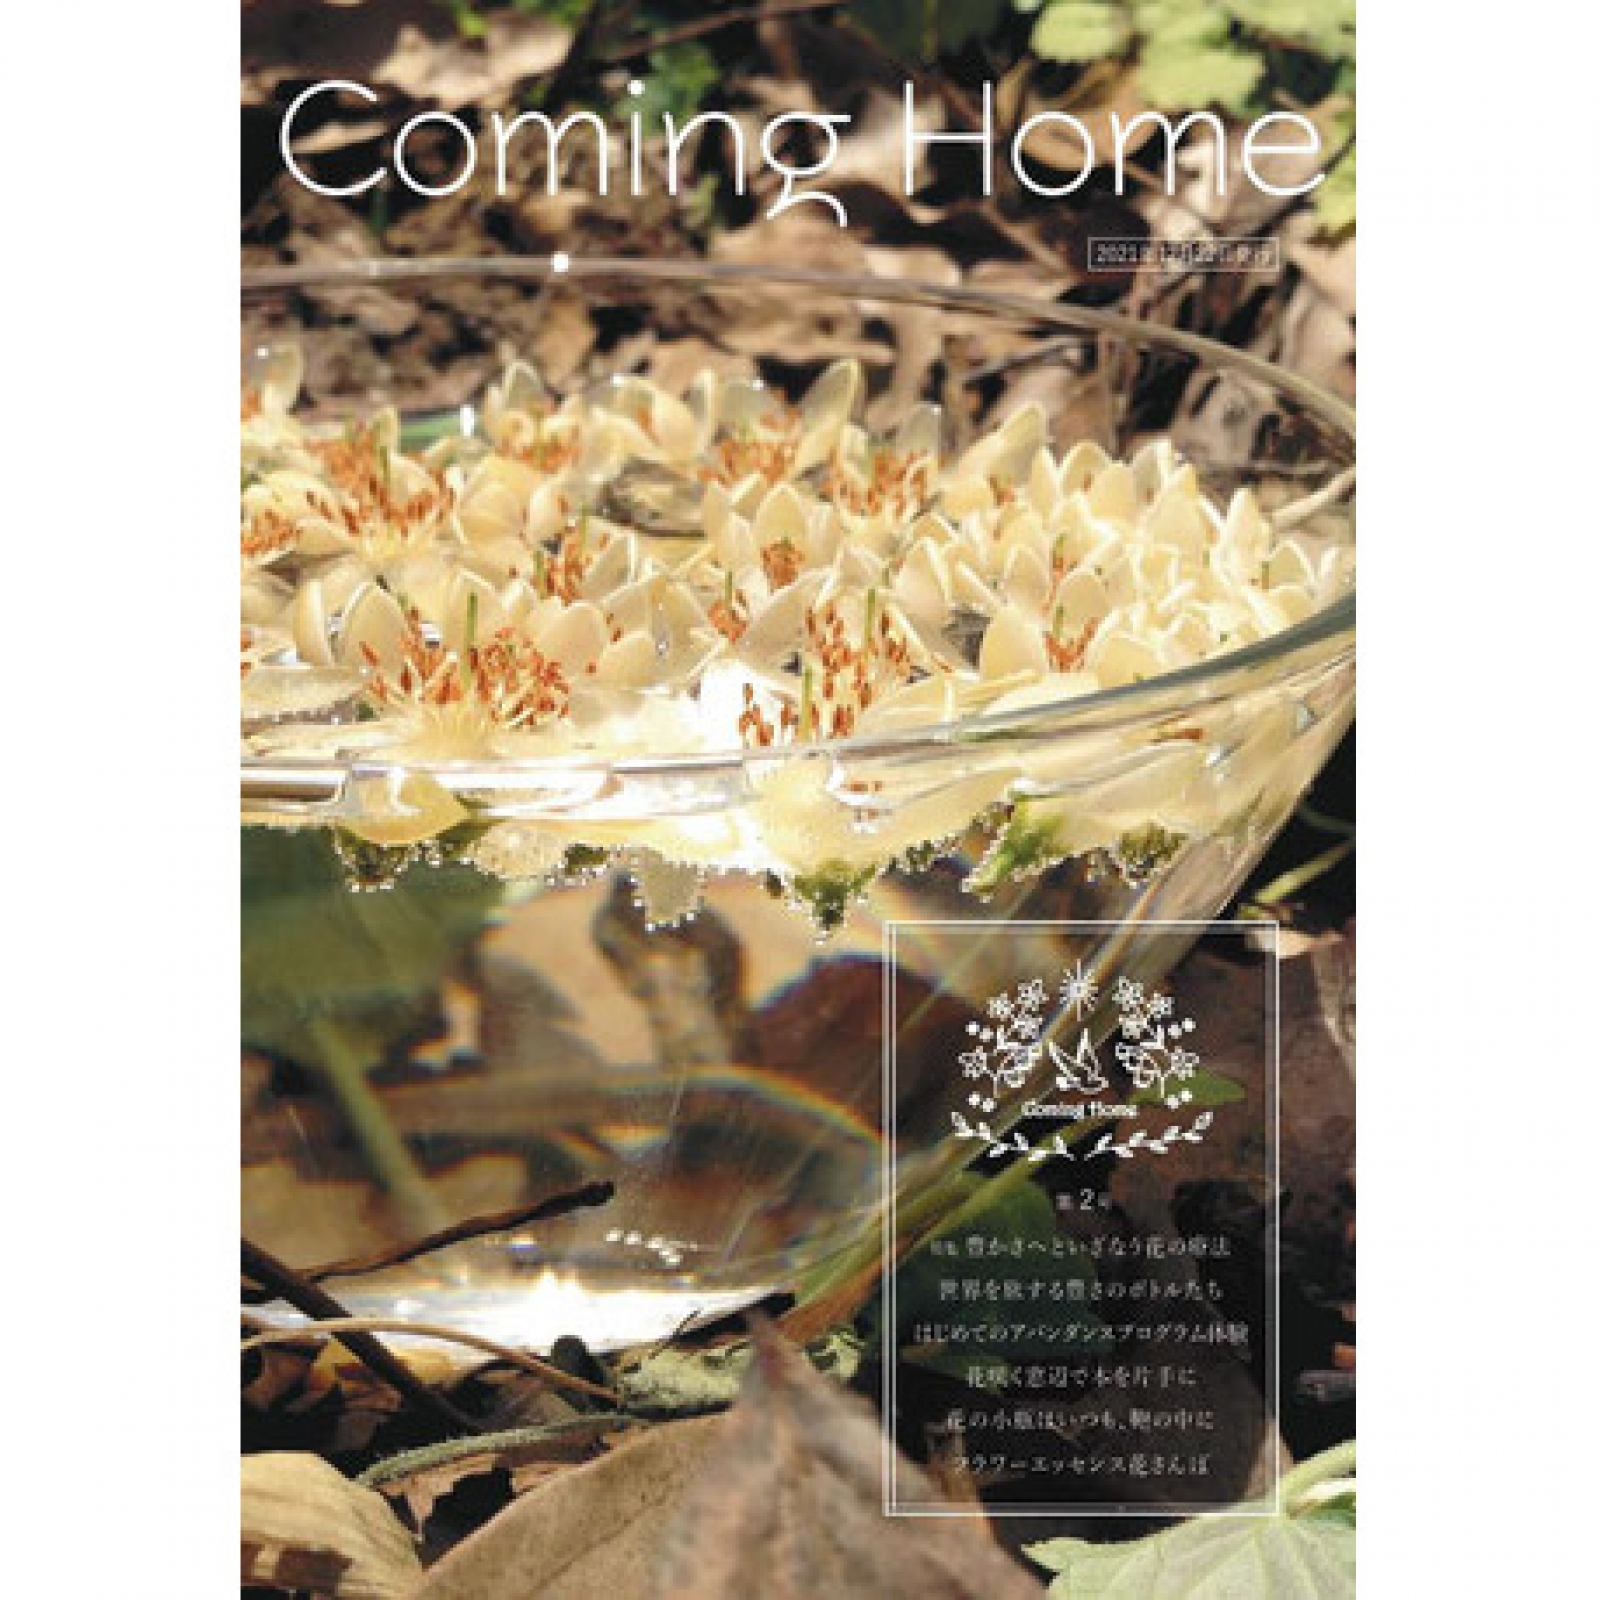 Coming Home 第2号